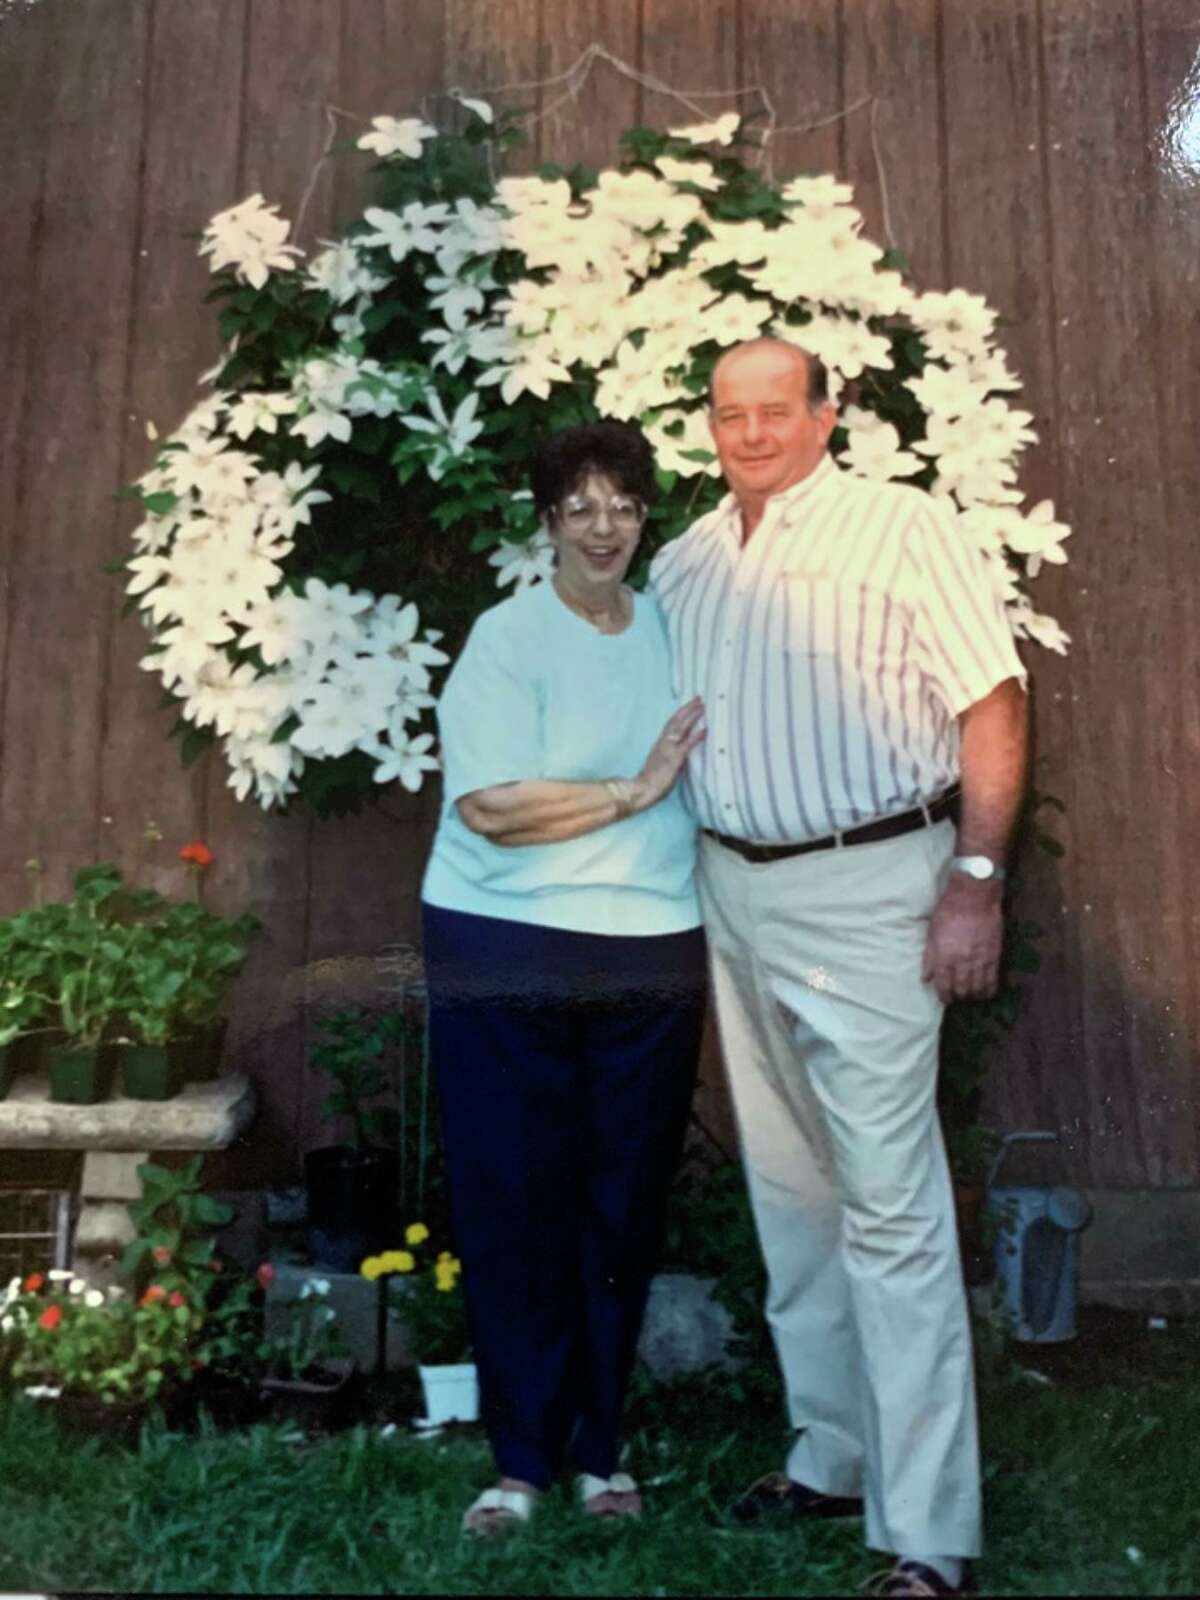 Charlie Steck with his late wife, Rose Steck. Steck, former two-term first selectman in Bethel, died Wednesday after battling dementia. He had been diagnosed with COVID-19, but his daughter said he did not have symptoms.